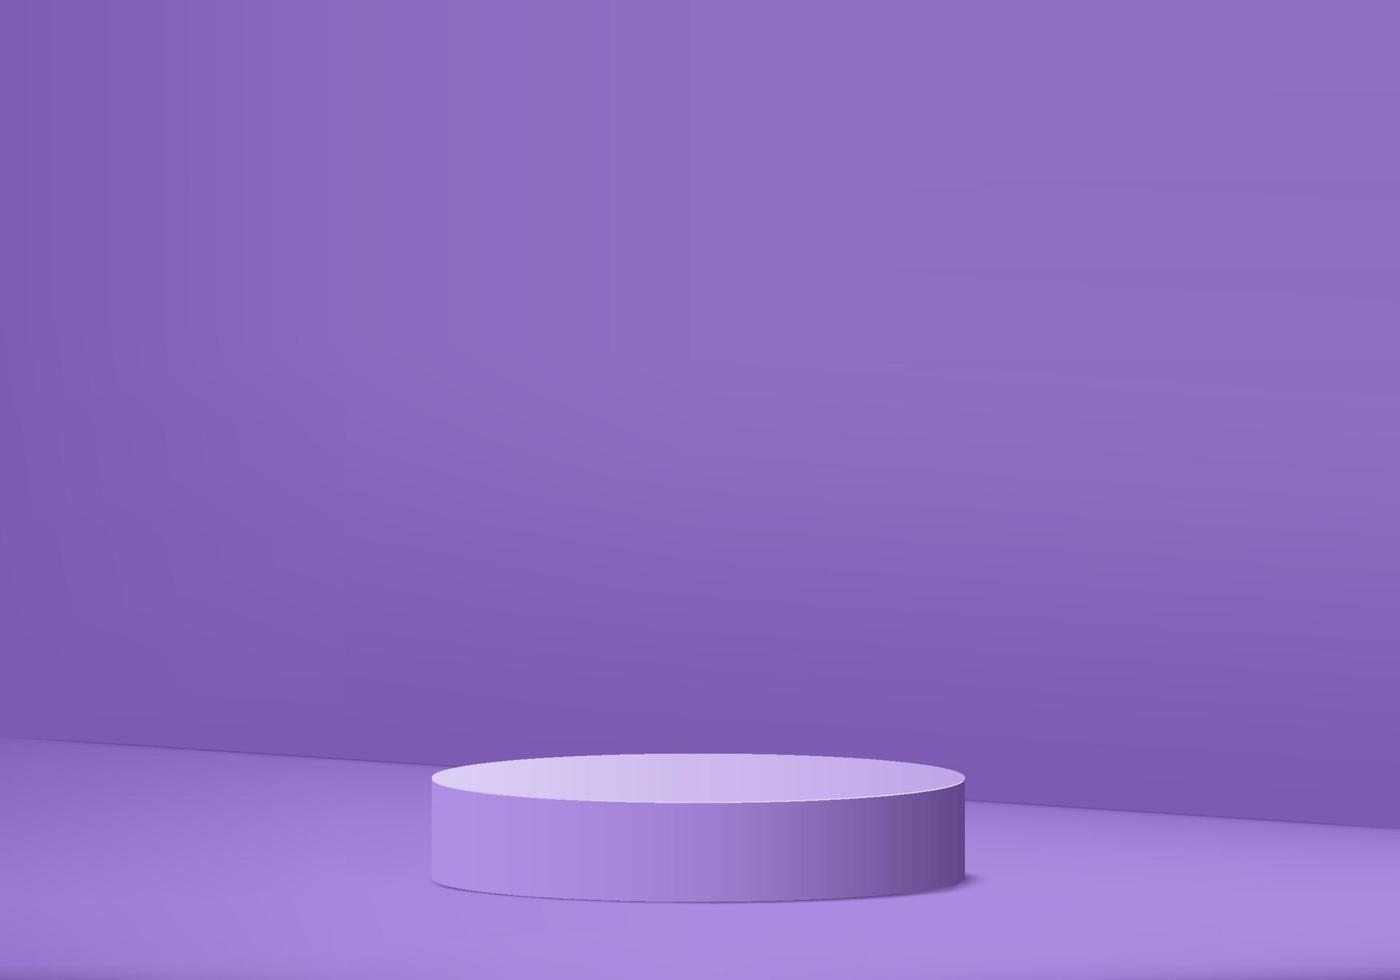 3d background products display podium scene with geometric platform. background vector 3d rendering with podium. stand to show cosmetic products. Stage showcase on pedestal display purple studio